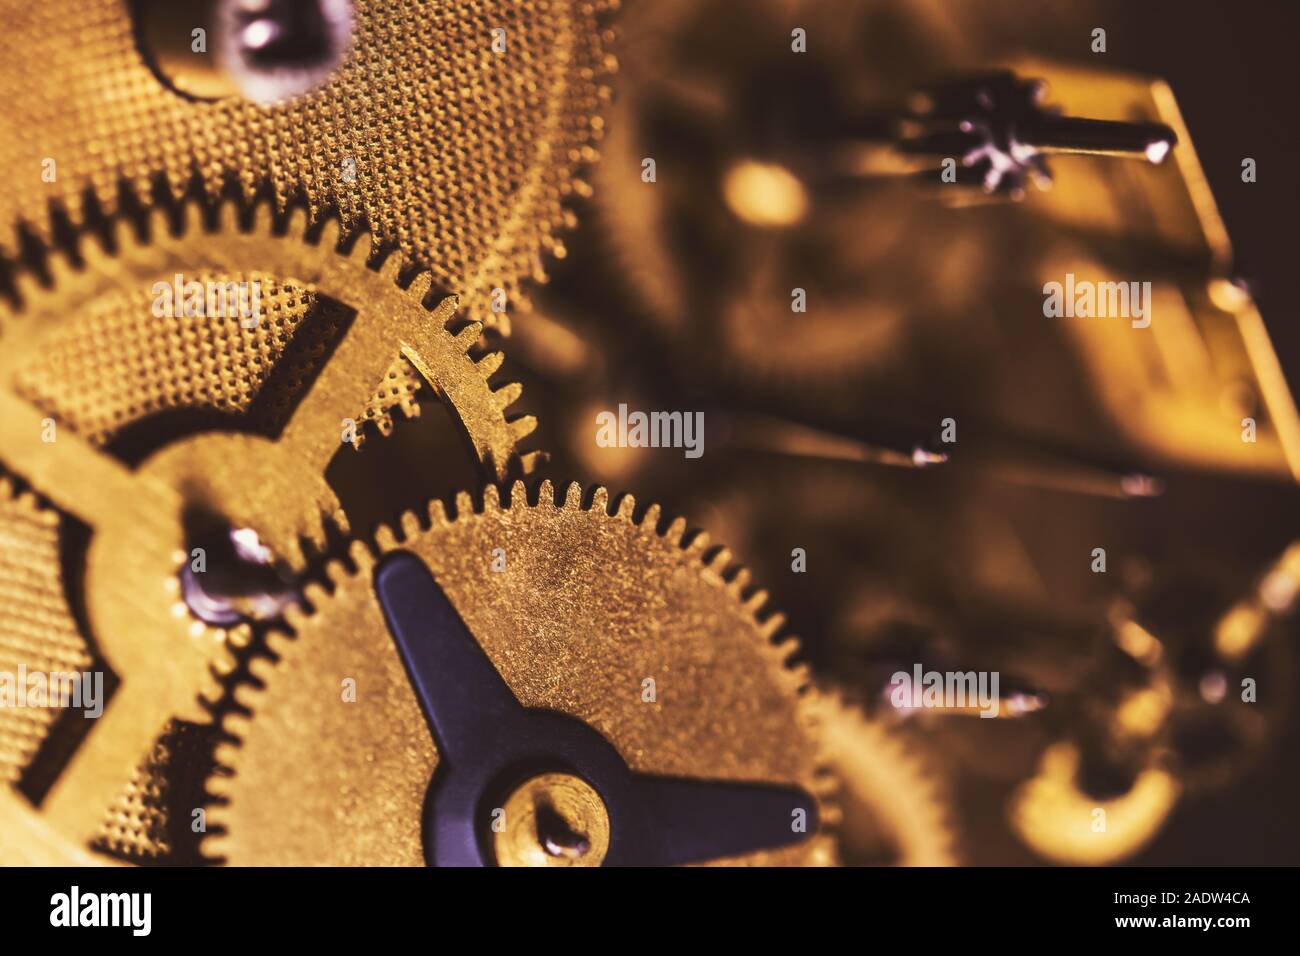 Details of a brassy Clockwork mechanism, cogwheels and components Stock Photo